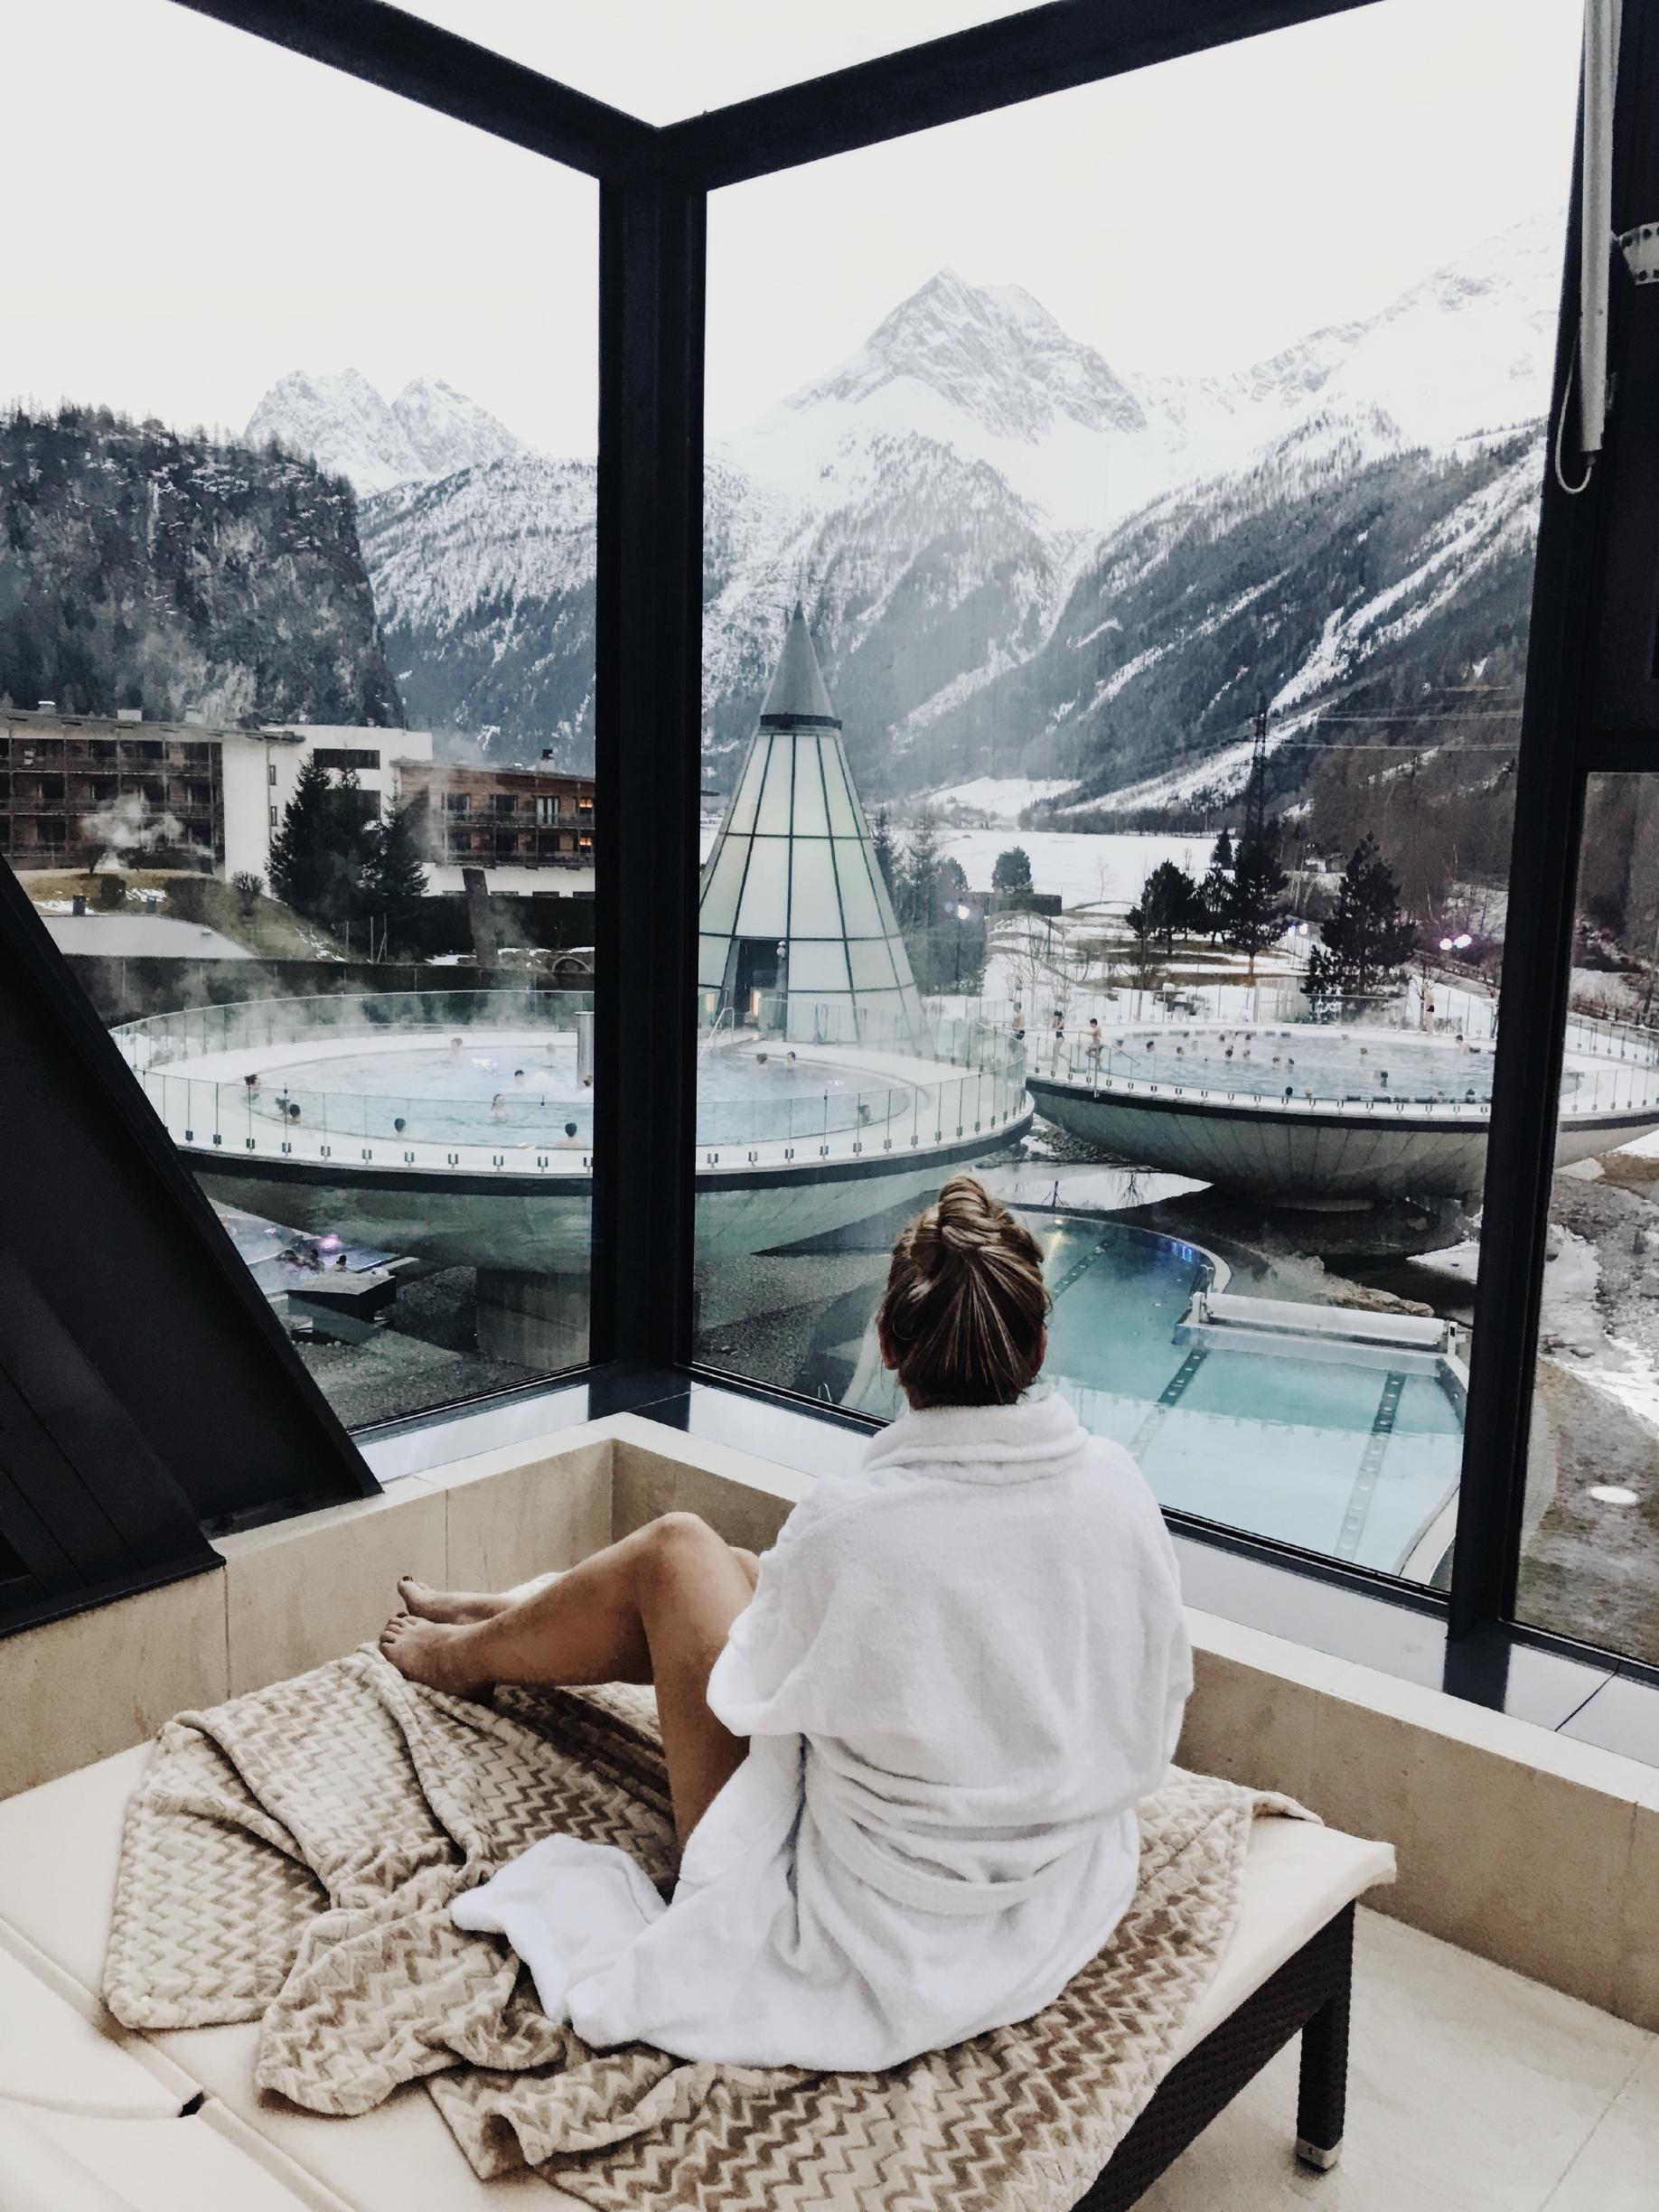 view.
#spa #beauty #hotel